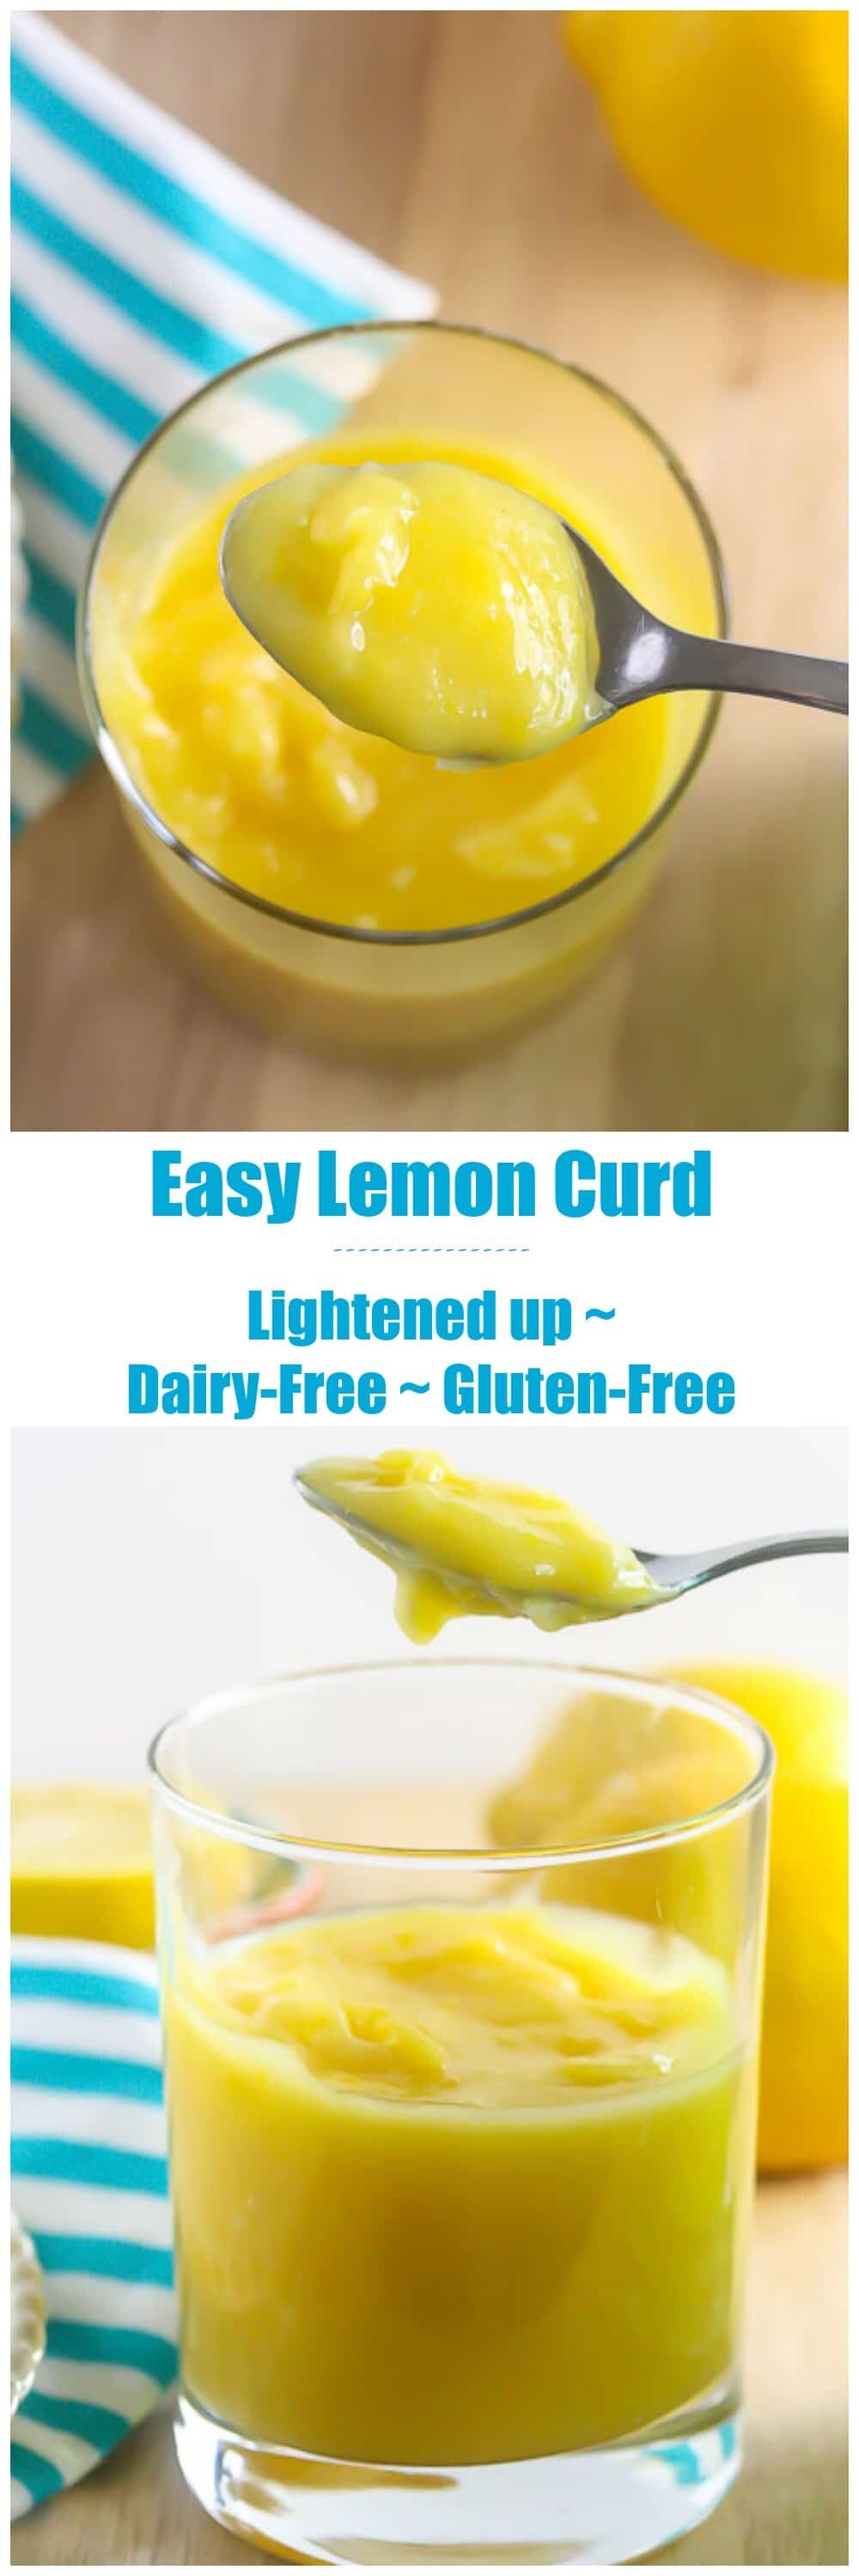 This Lemon Curd is lightened up, but still as delicious as the classic dessert spread. www.laurenkellynutrition.com